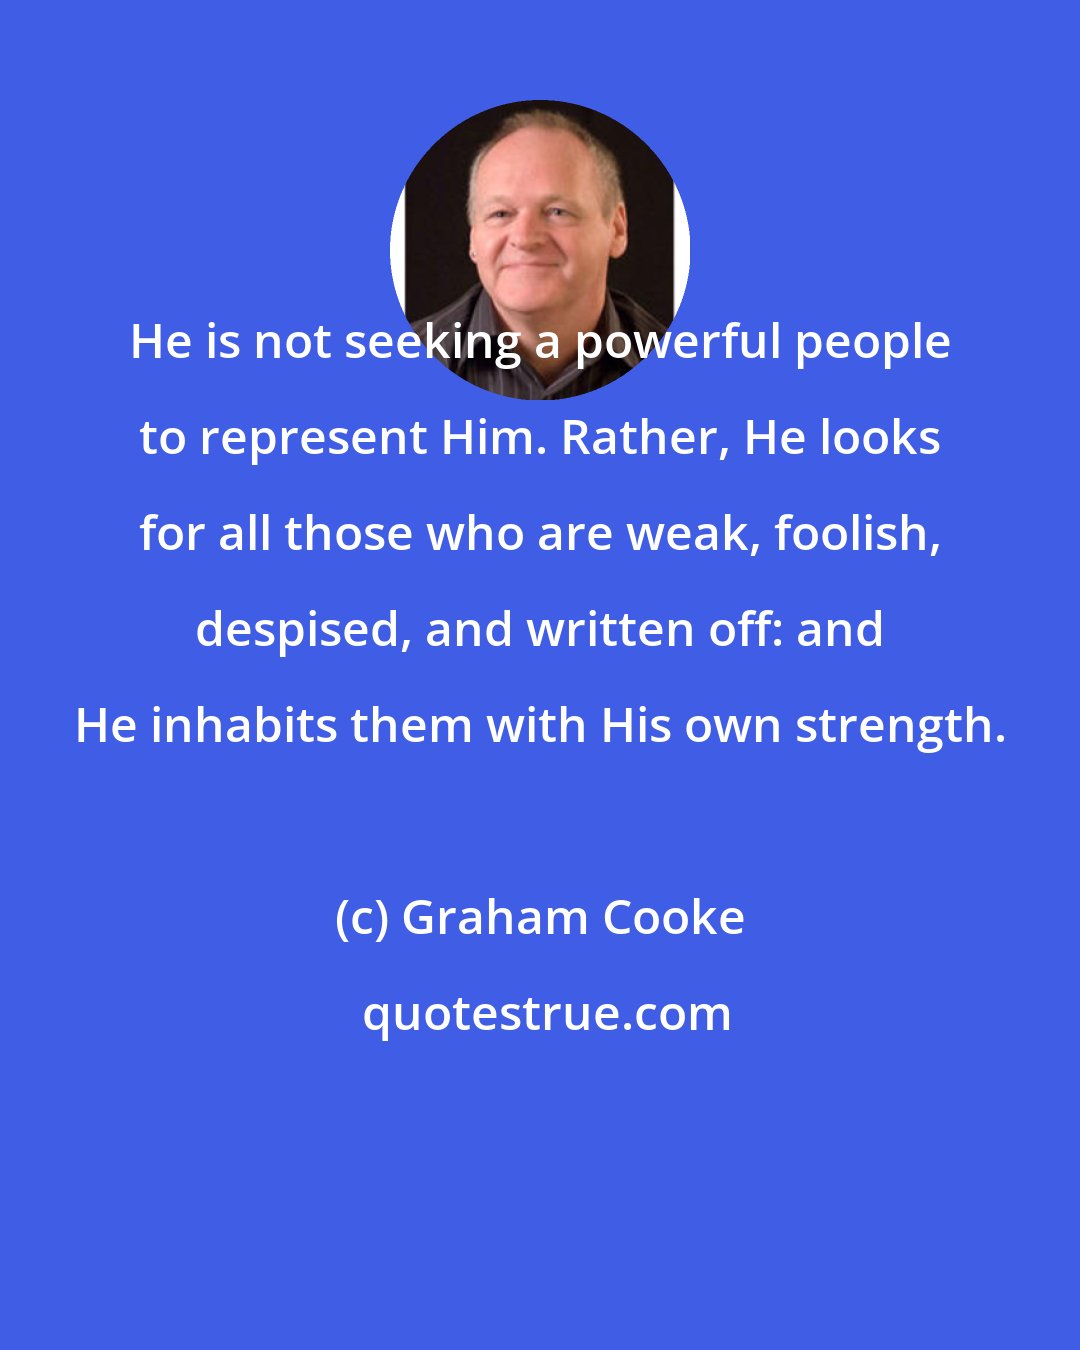 Graham Cooke: He is not seeking a powerful people to represent Him. Rather, He looks for all those who are weak, foolish, despised, and written off: and He inhabits them with His own strength.